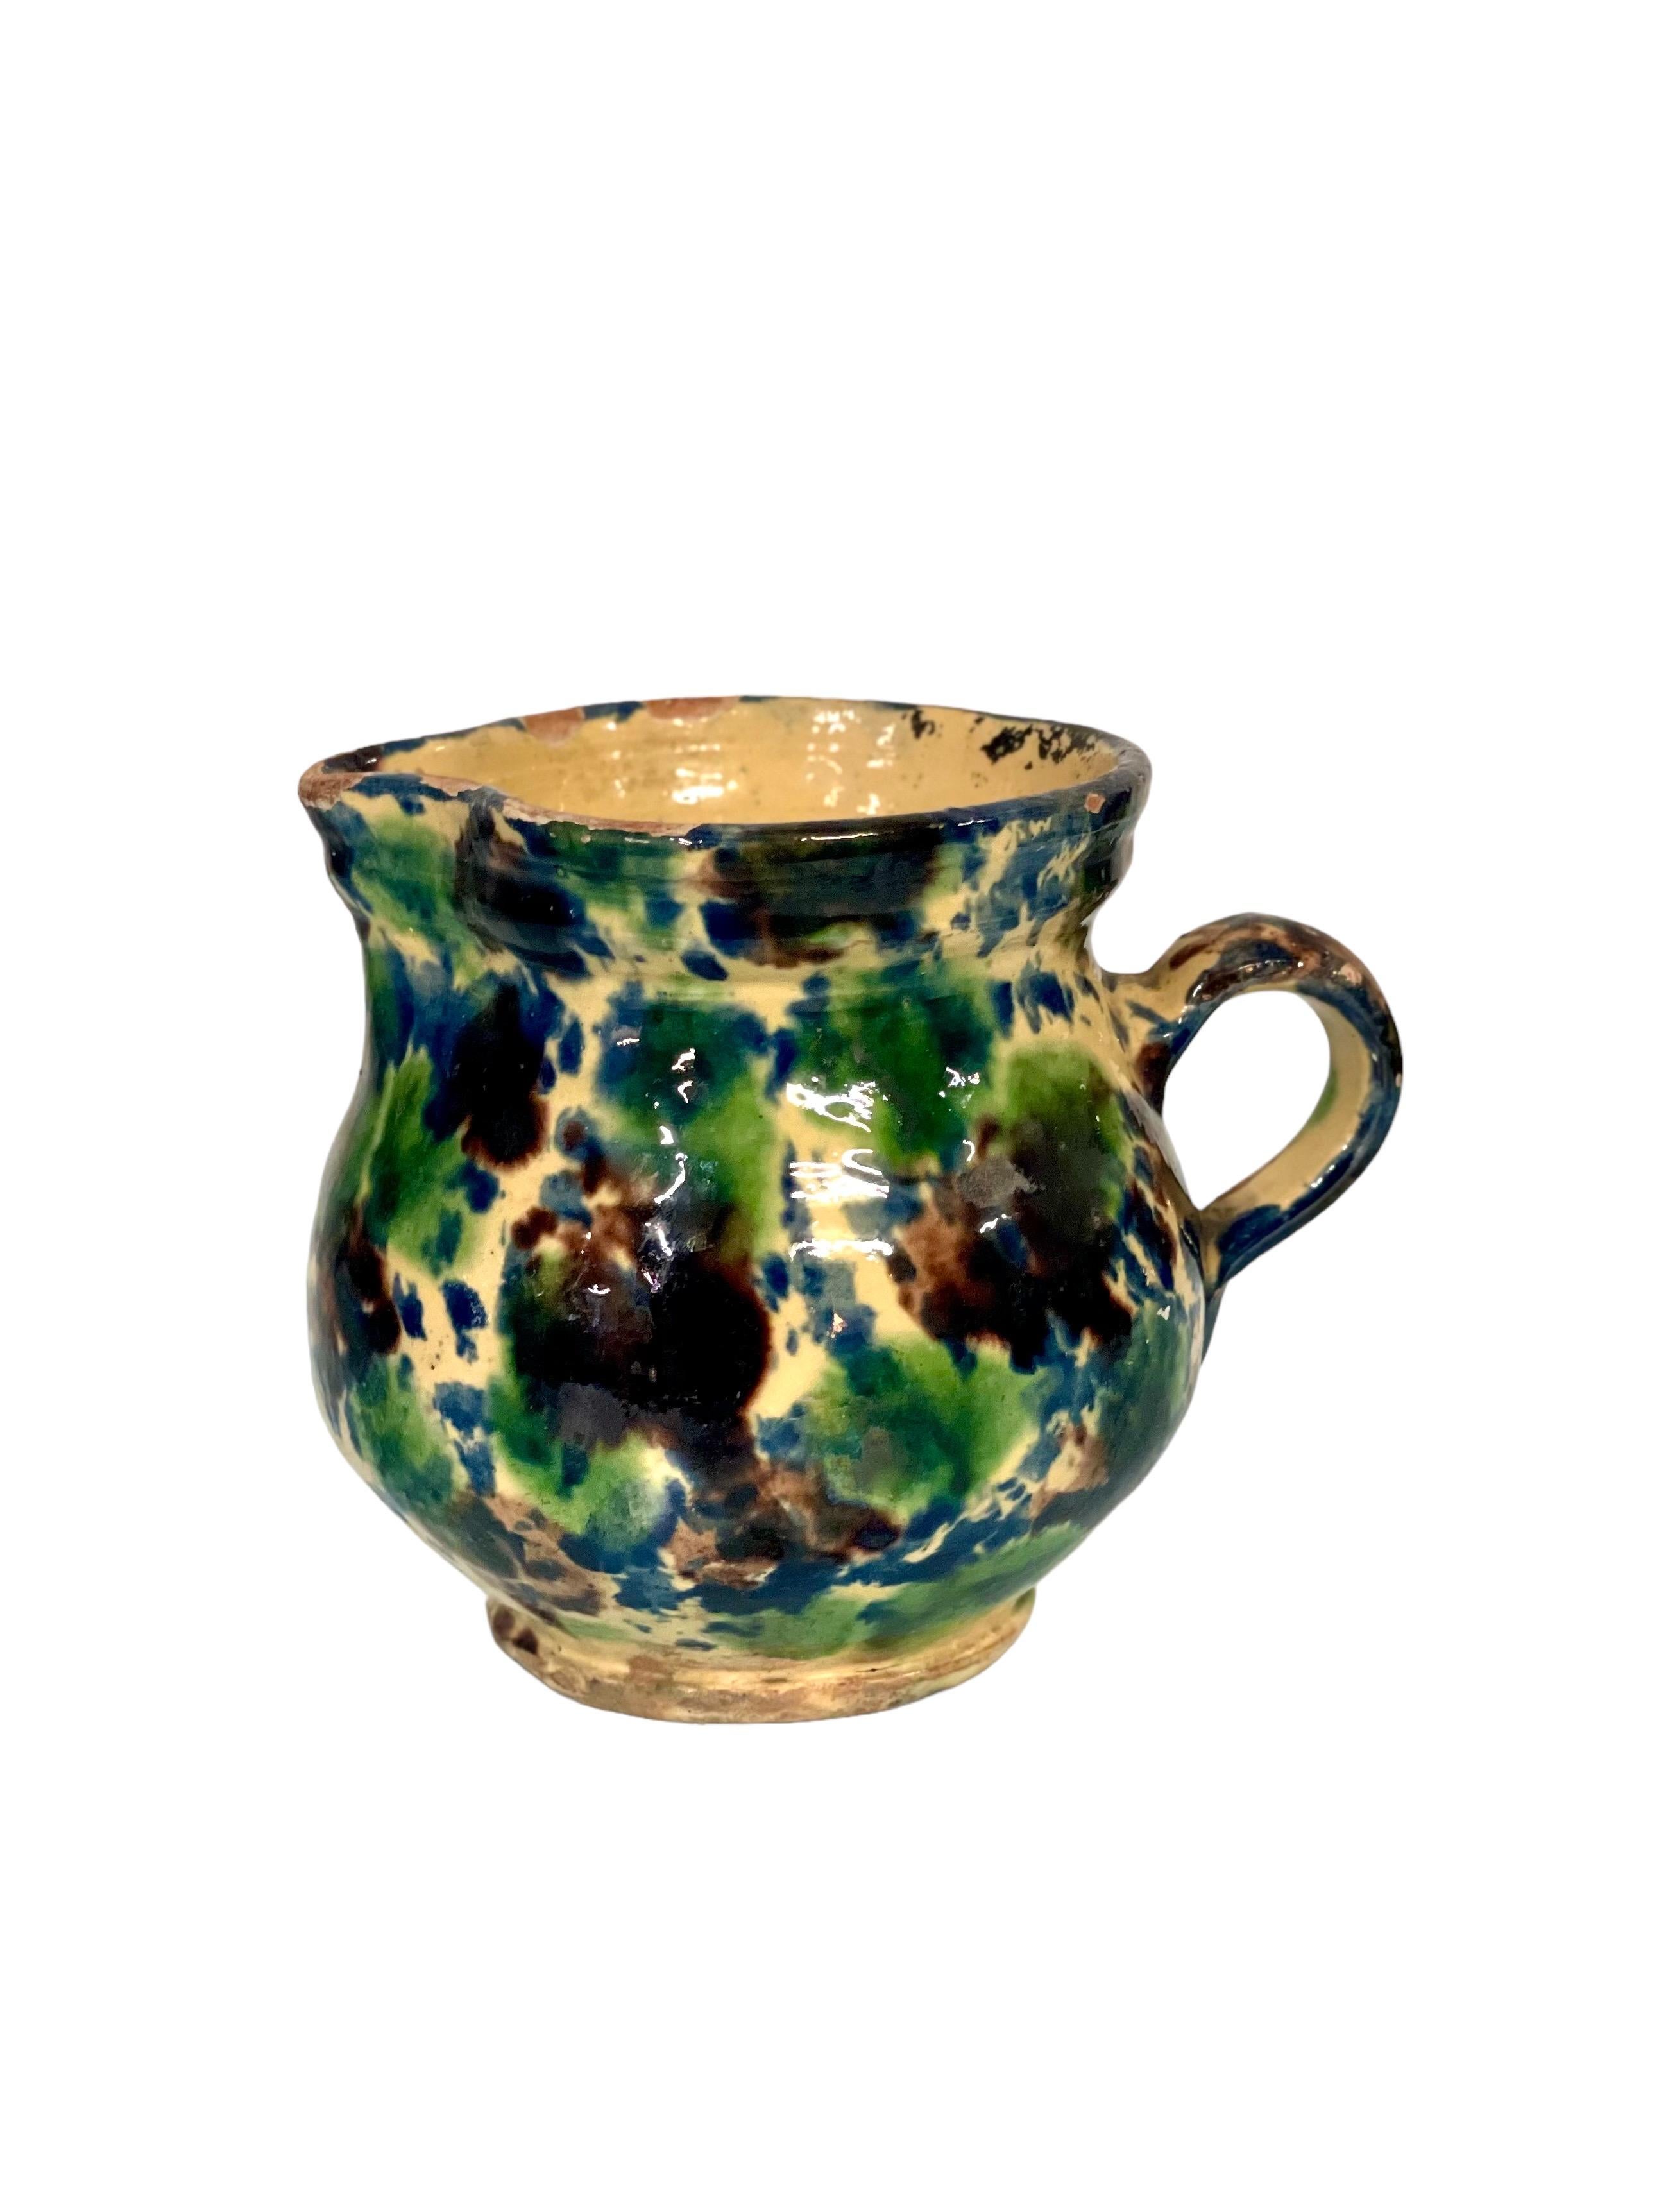 A tiny French rustic terracotta water or milk jug with handle and shaped spout, decorated in an eye-catching multicoloured glaze. Ideal for a country-style home or farmhouse kitchen. 19th century.